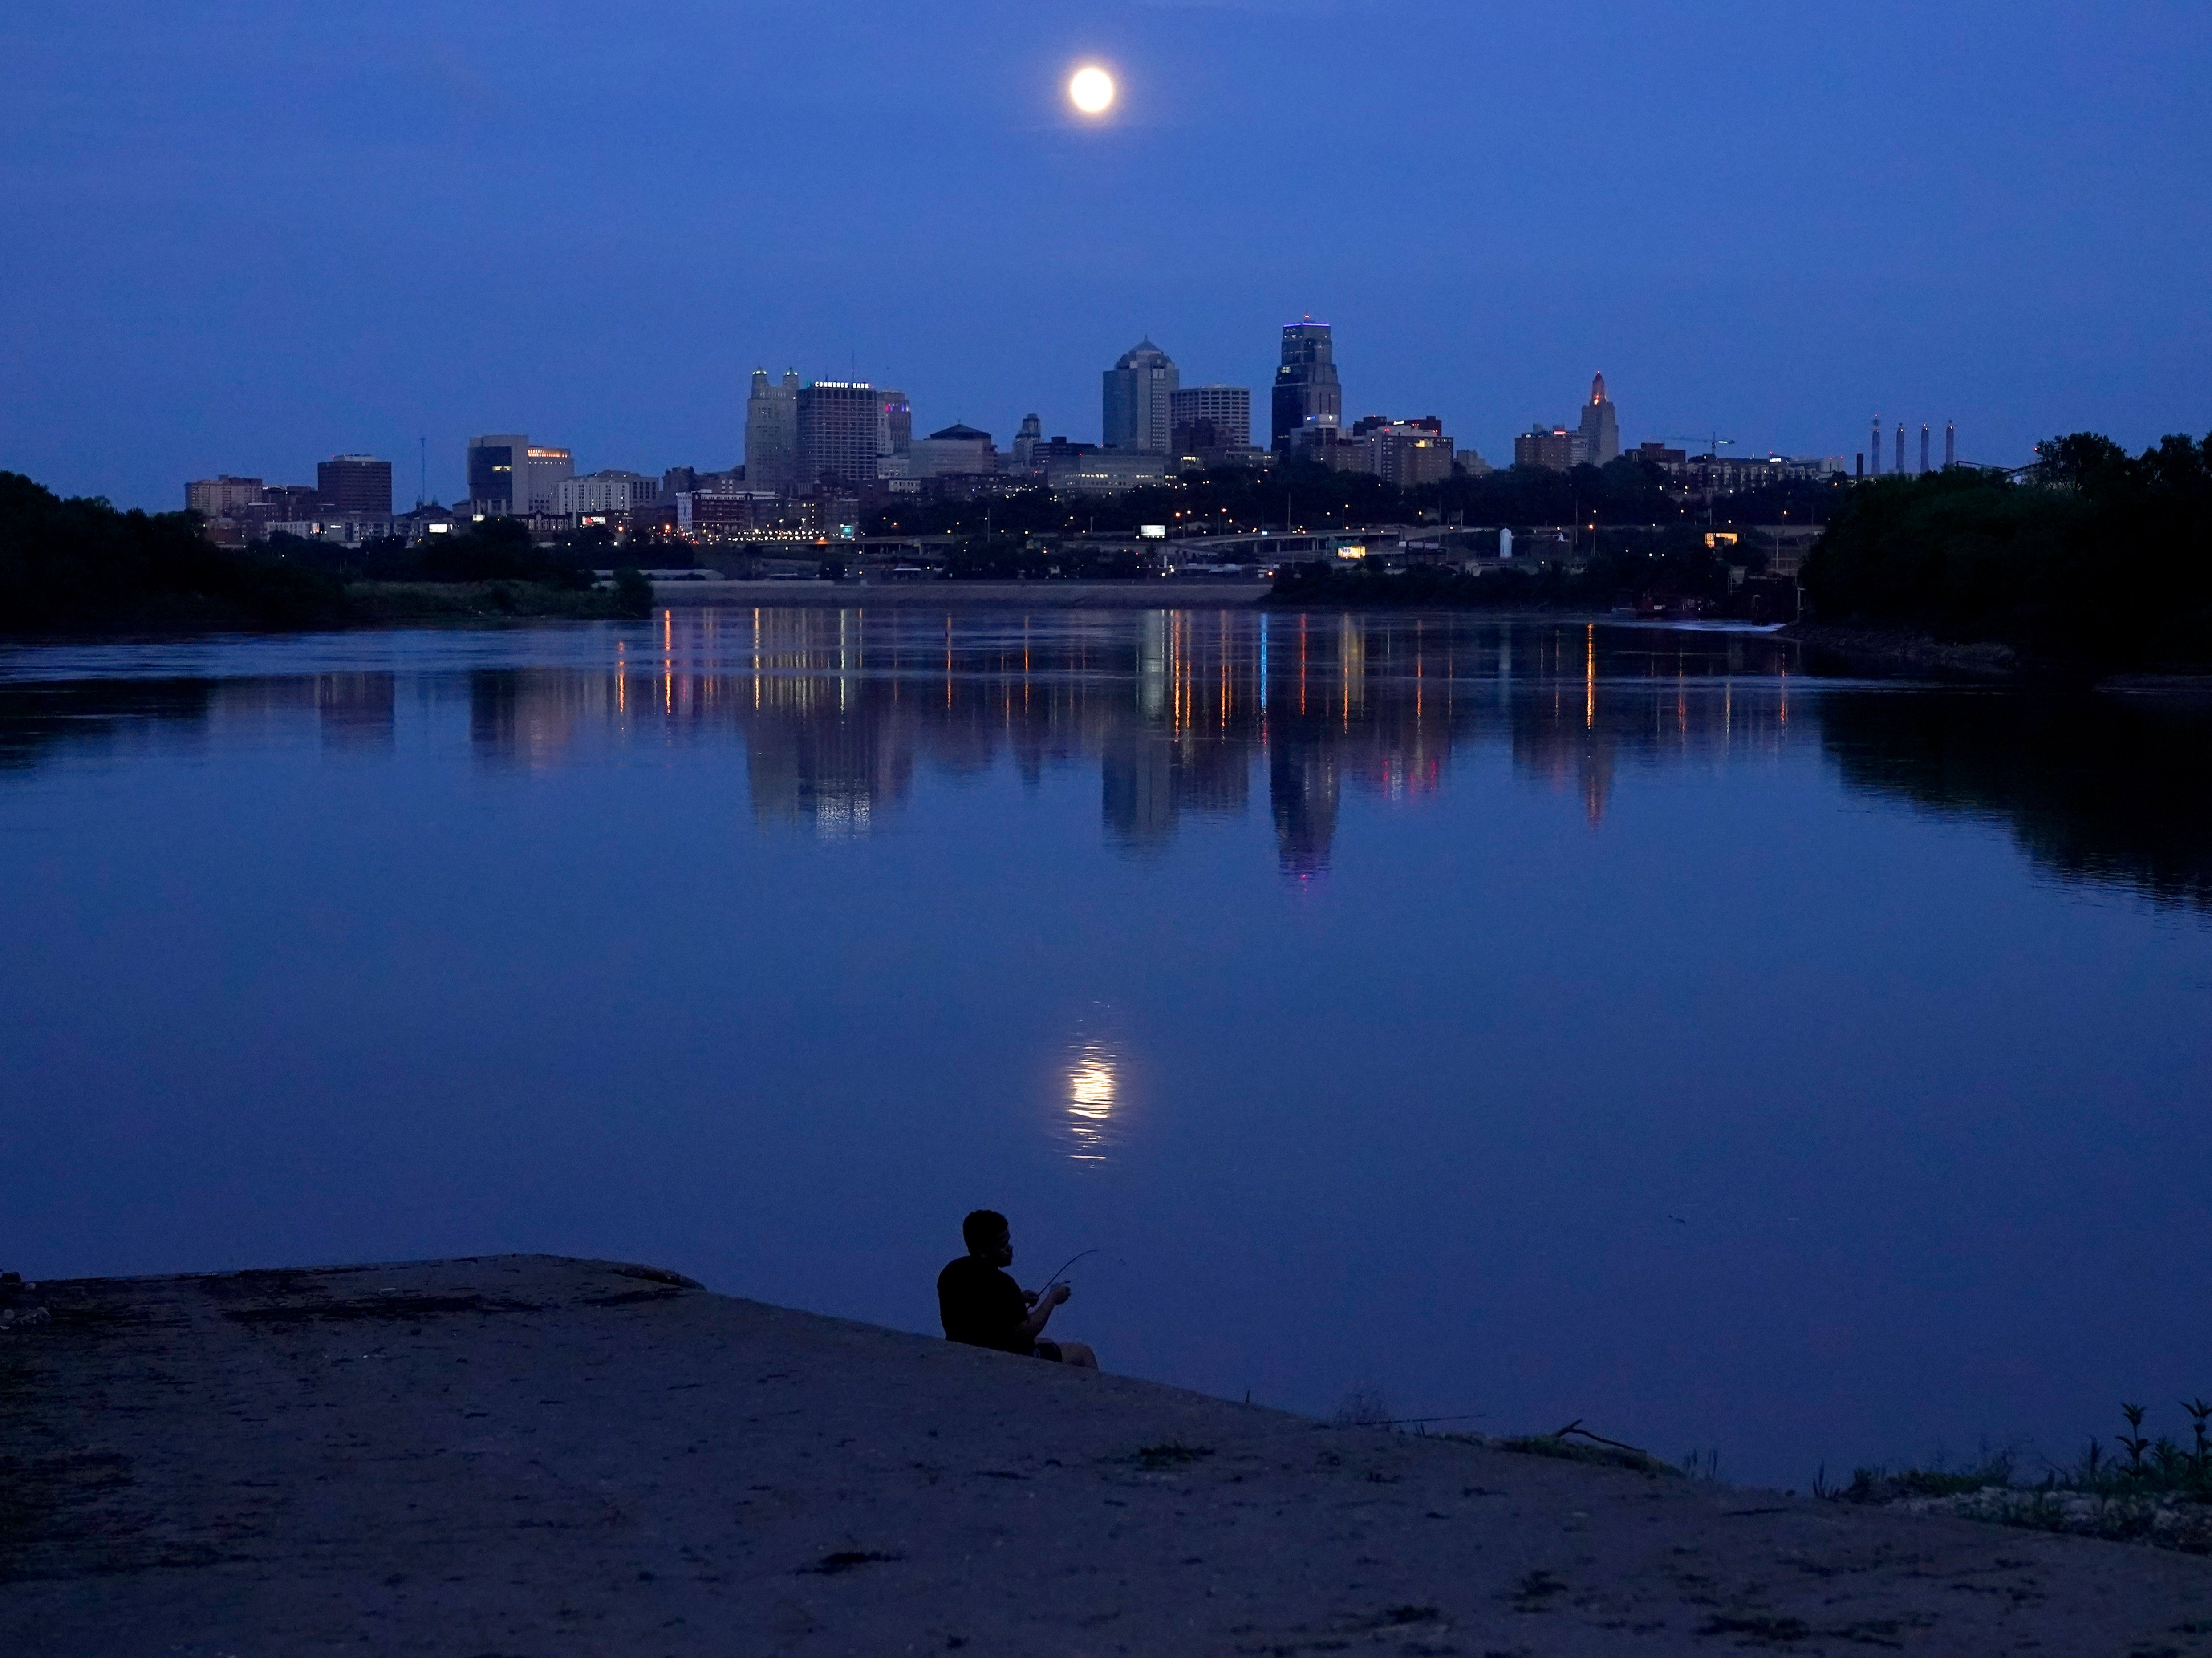 A man fishes in the Missouri River as the full moon rises beyond the skyline of downtown Kansas City, Missouri, on Tuesday 25 May 2021